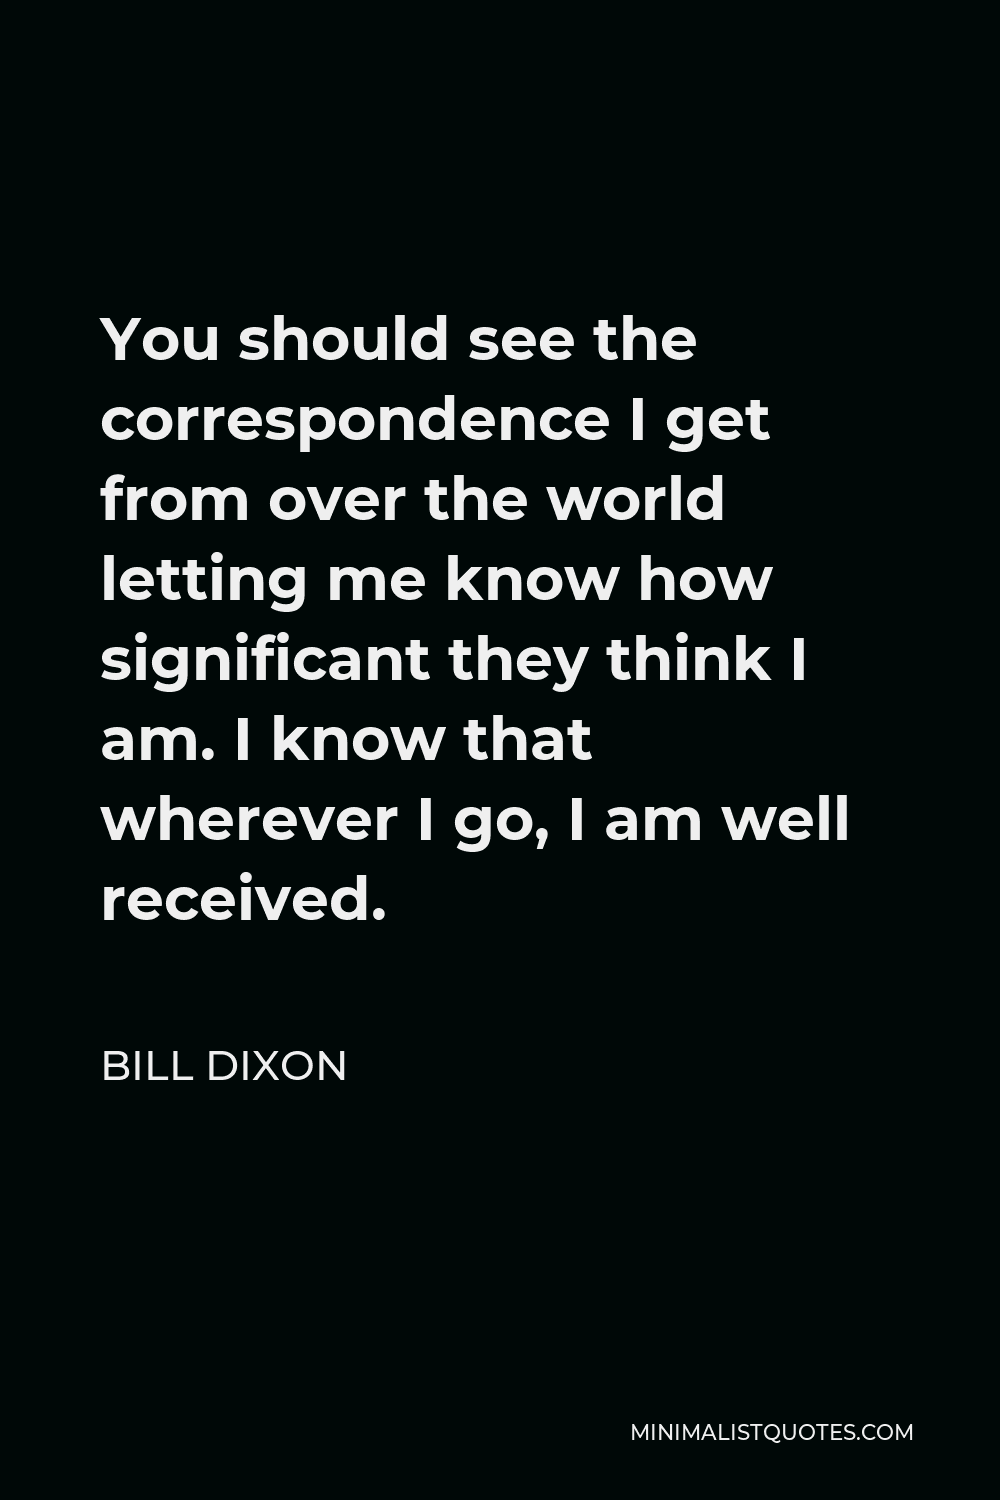 Bill Dixon Quote - You should see the correspondence I get from over the world letting me know how significant they think I am. I know that wherever I go, I am well received.